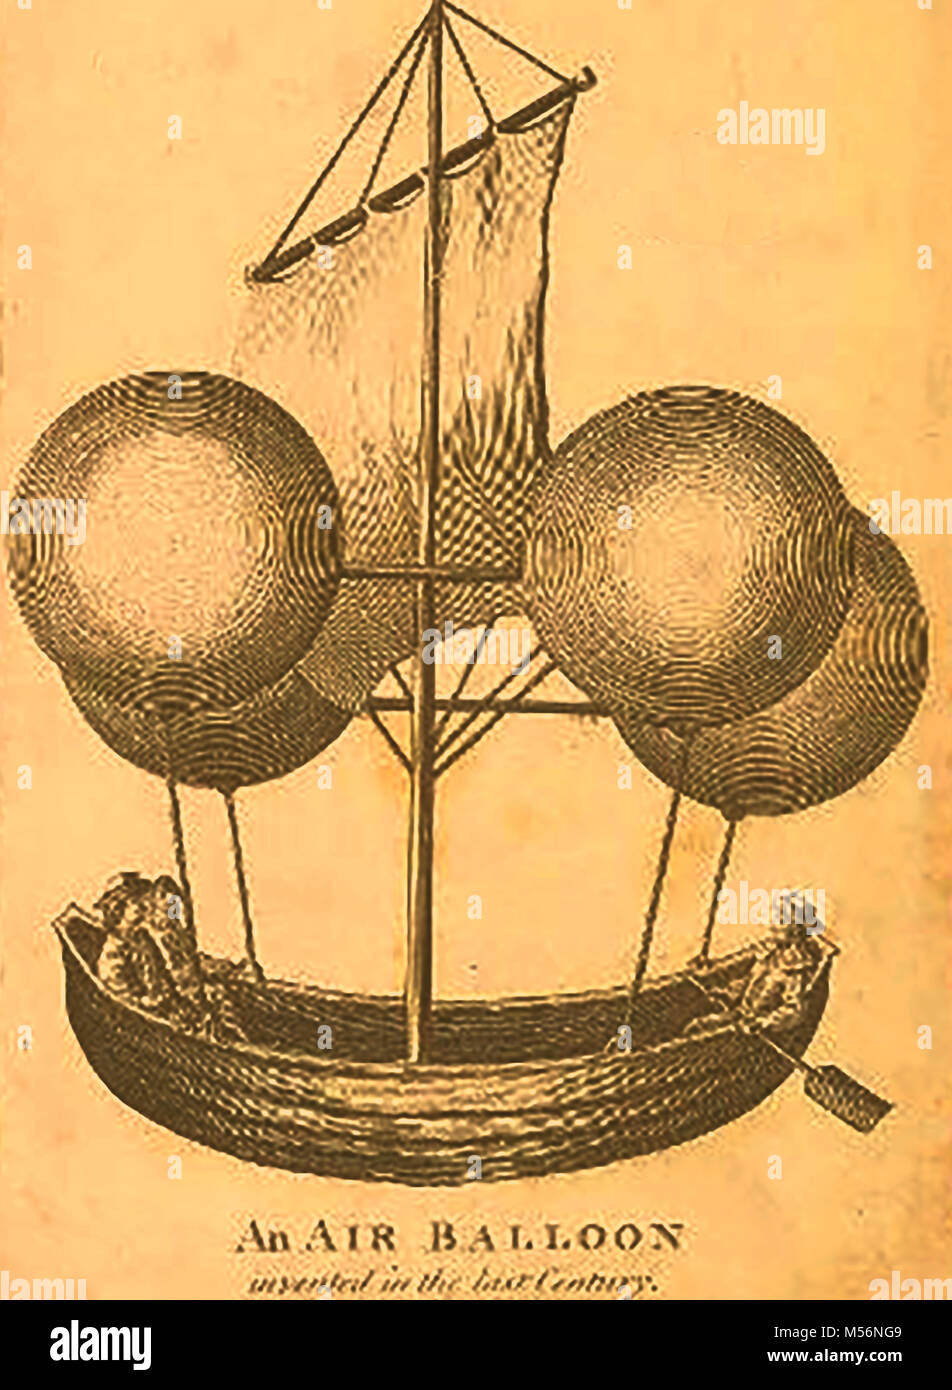 historic aeronautics, balloons and flying machines -1783 illustration of a balloon 'invented in the last century' Stock Photo